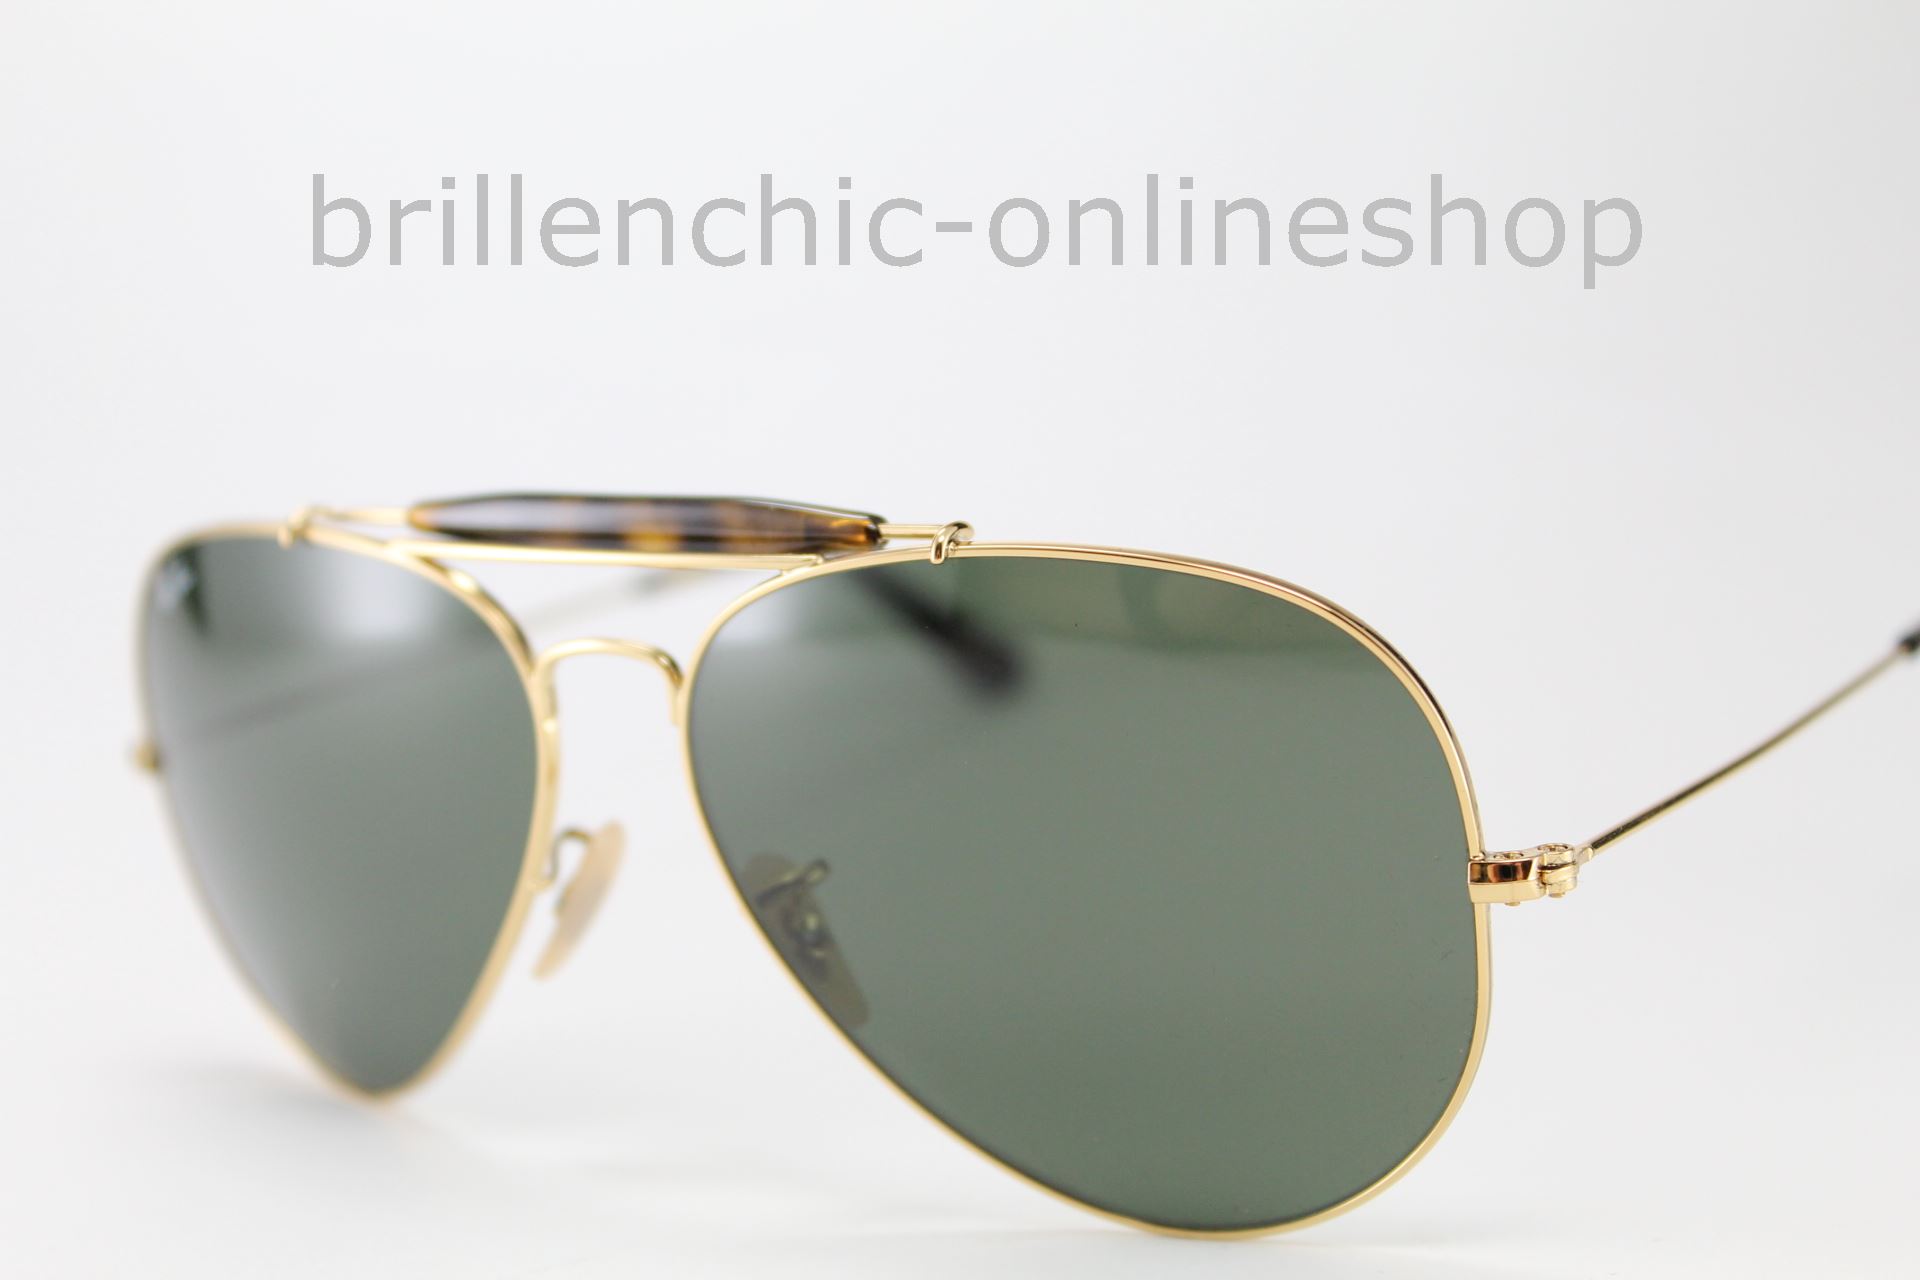 Brillenchic-onlineshop in Berlin - Ray Ban OUTDOORSMAN II RB 3029 181 